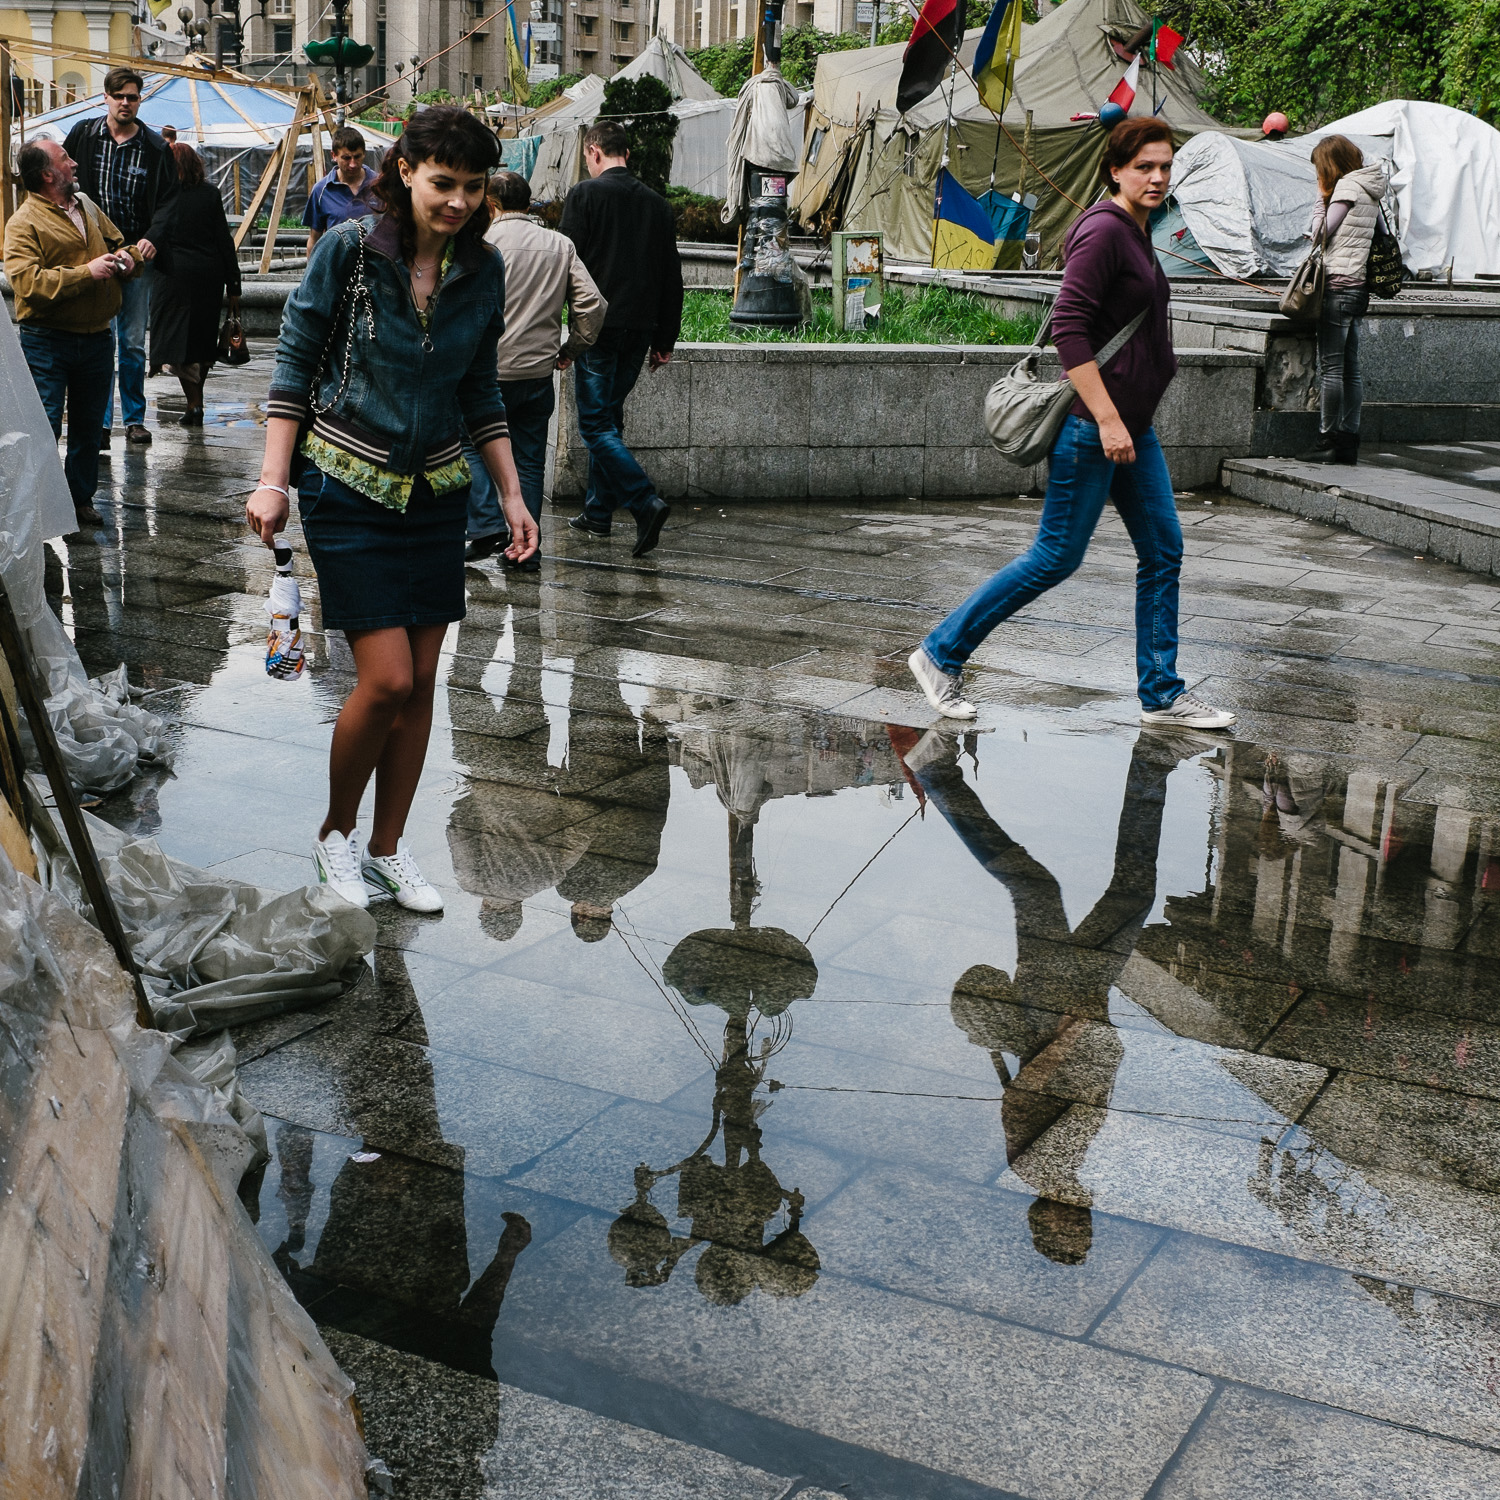  People step around puddles of water after a rain shower on Kyiv's Independence Square, April 2014. 